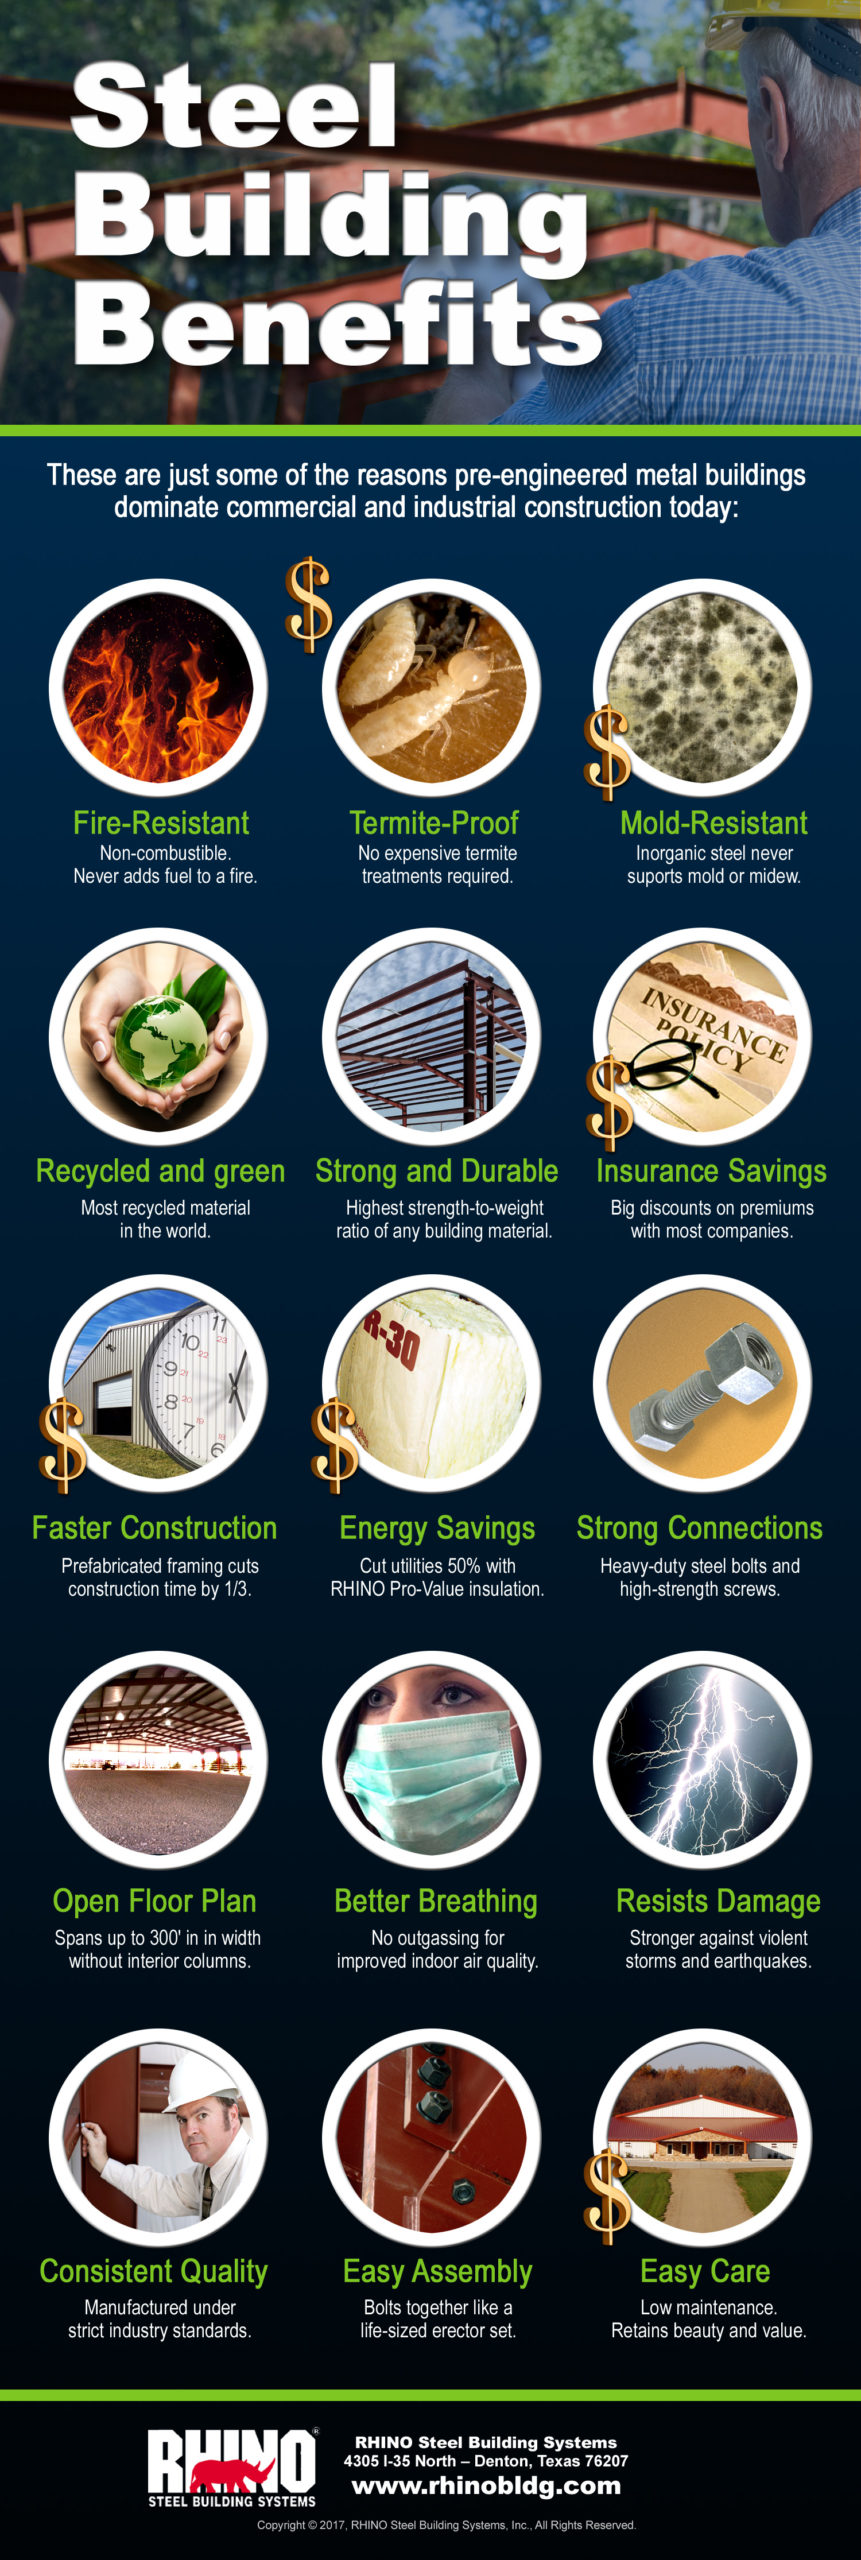 RHINO steel buildings benefits infographic shows 15 benefits provided by pre-engineered steel buidlings.